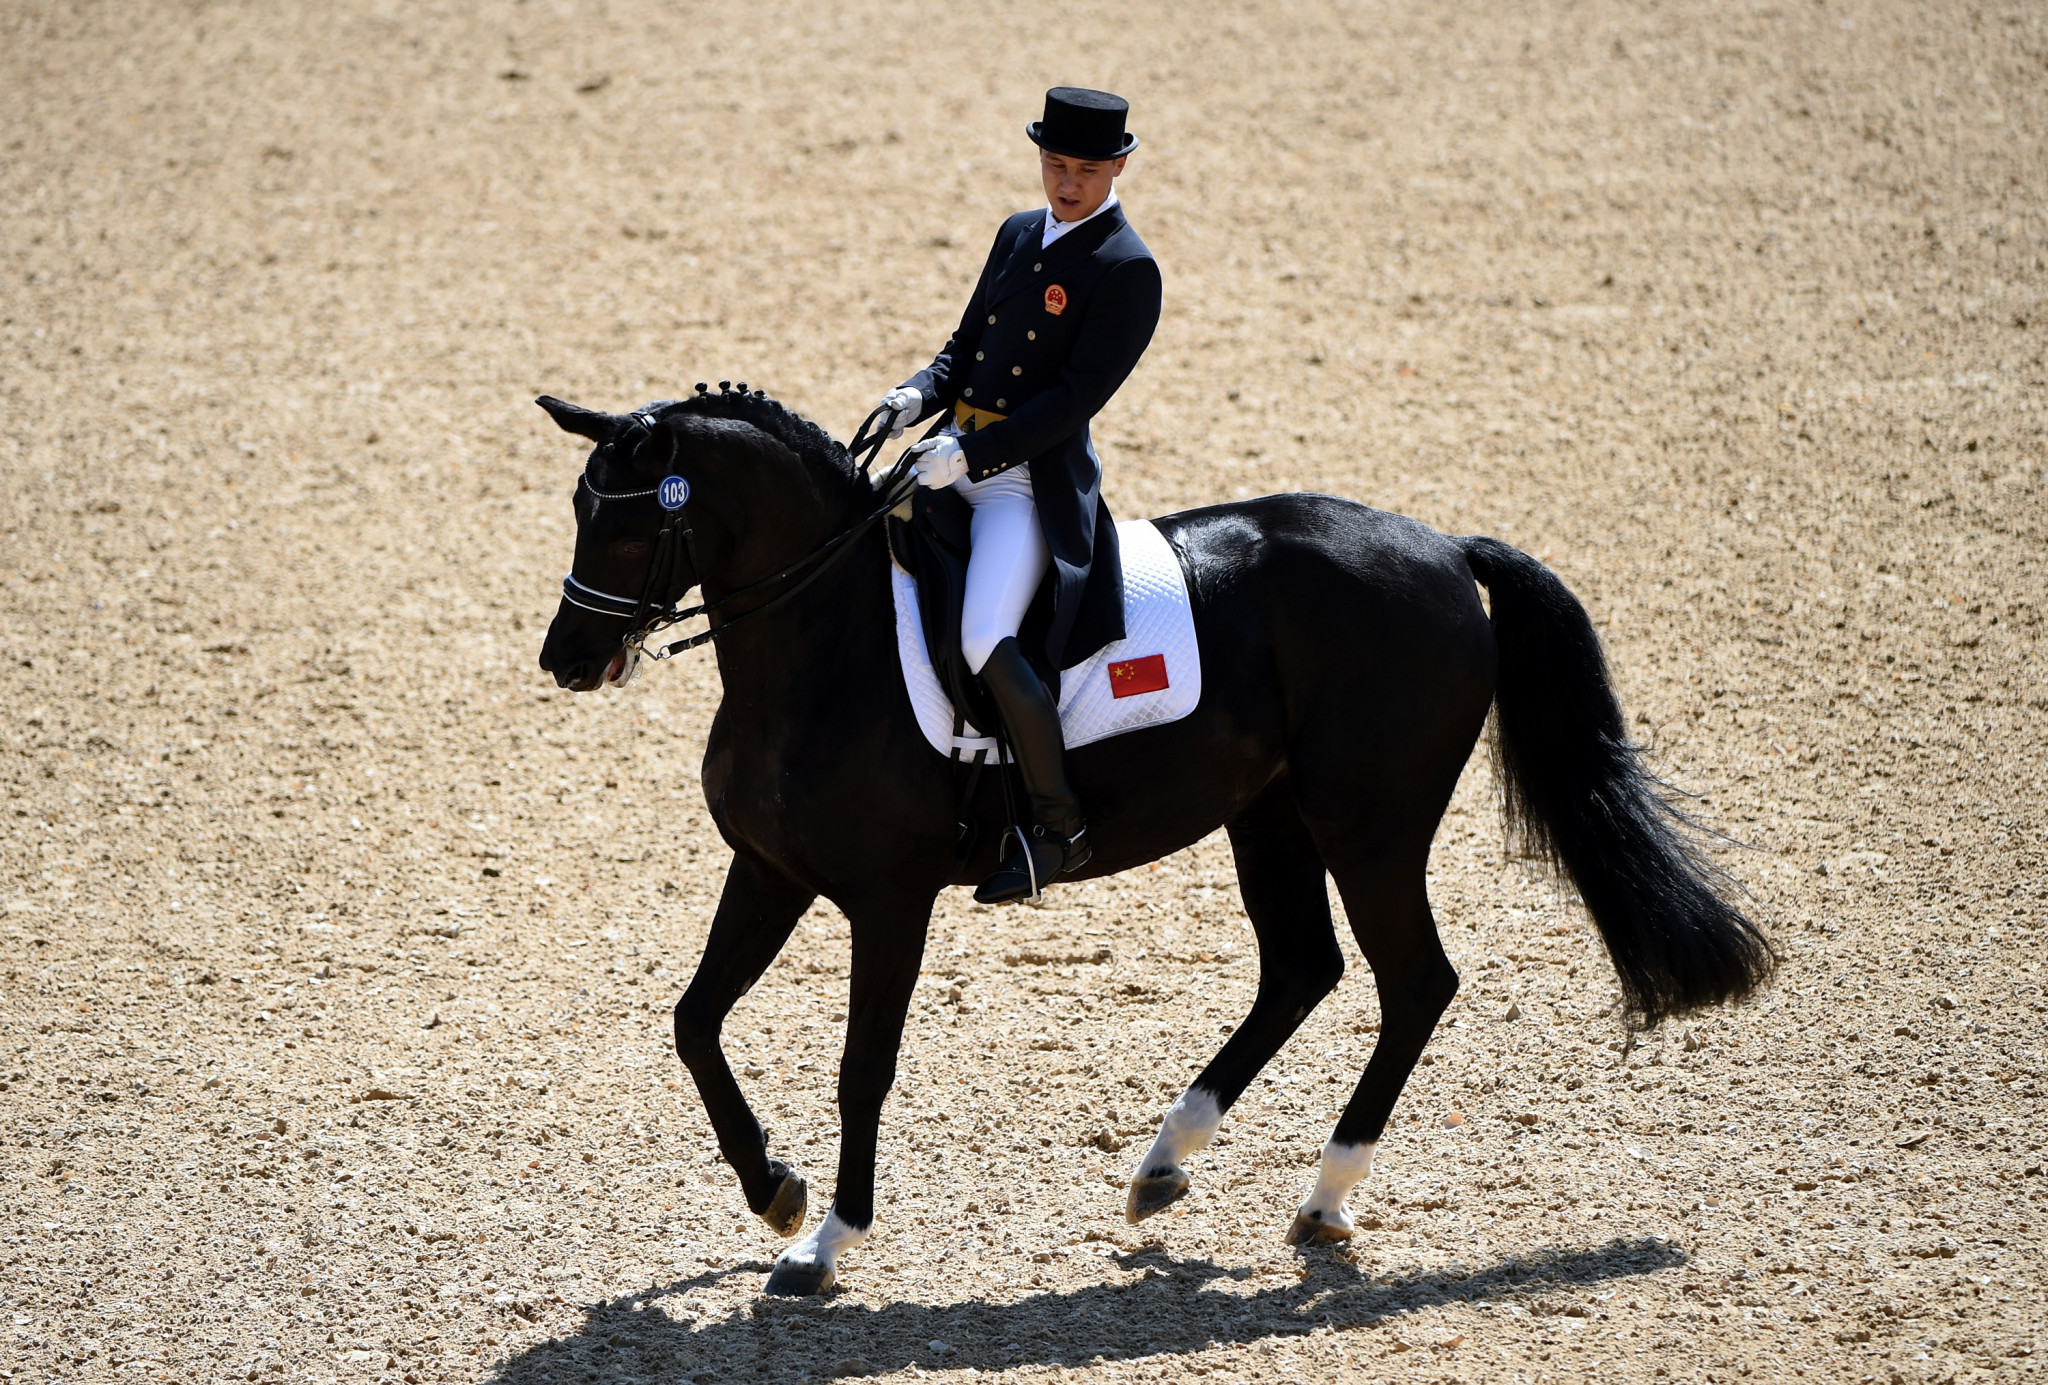 Hangzhou International Equestrian Open to serve as test event for 2022 Asian Games